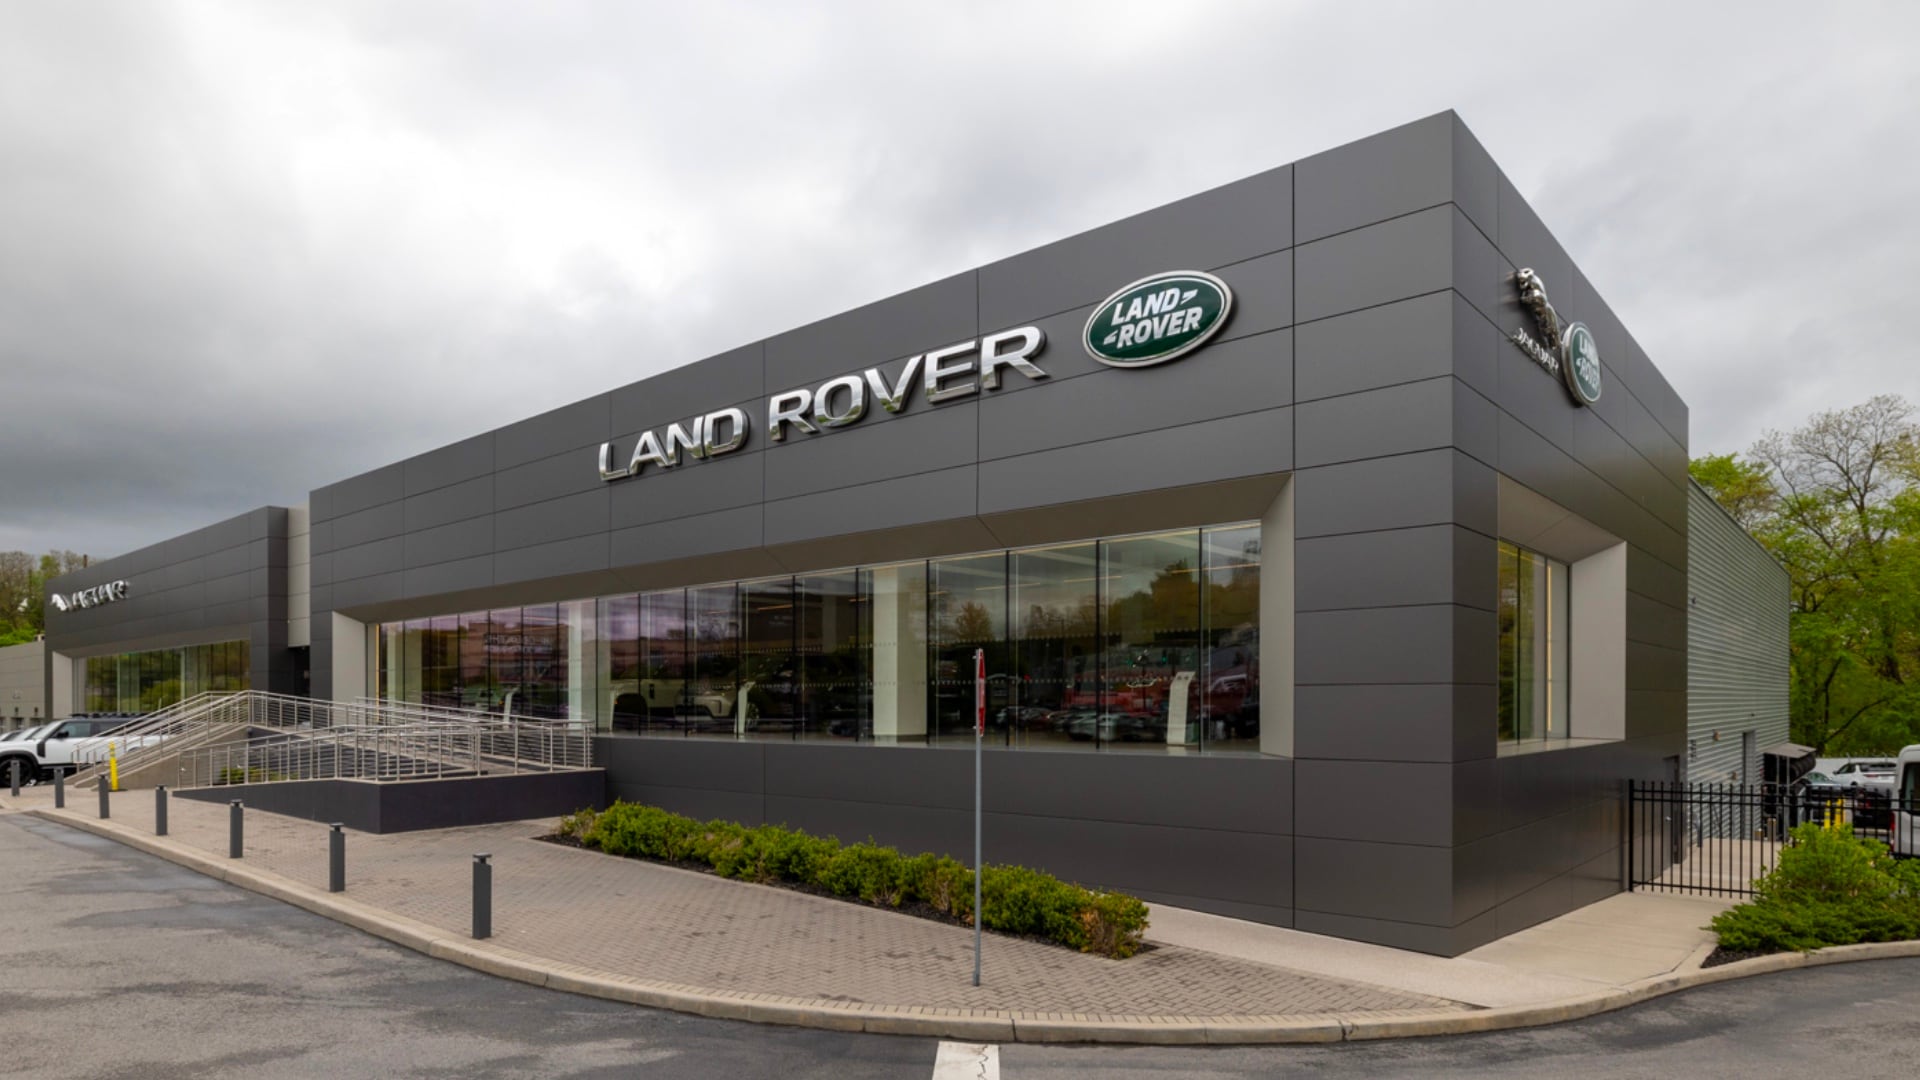 Grey Land Rover White Plains dealership building with a cloudy sky in the background. Vehicles can be seen inside through the large glass windows, and outside in the lot. A large Land Rover logo and sign can be seen on the building.